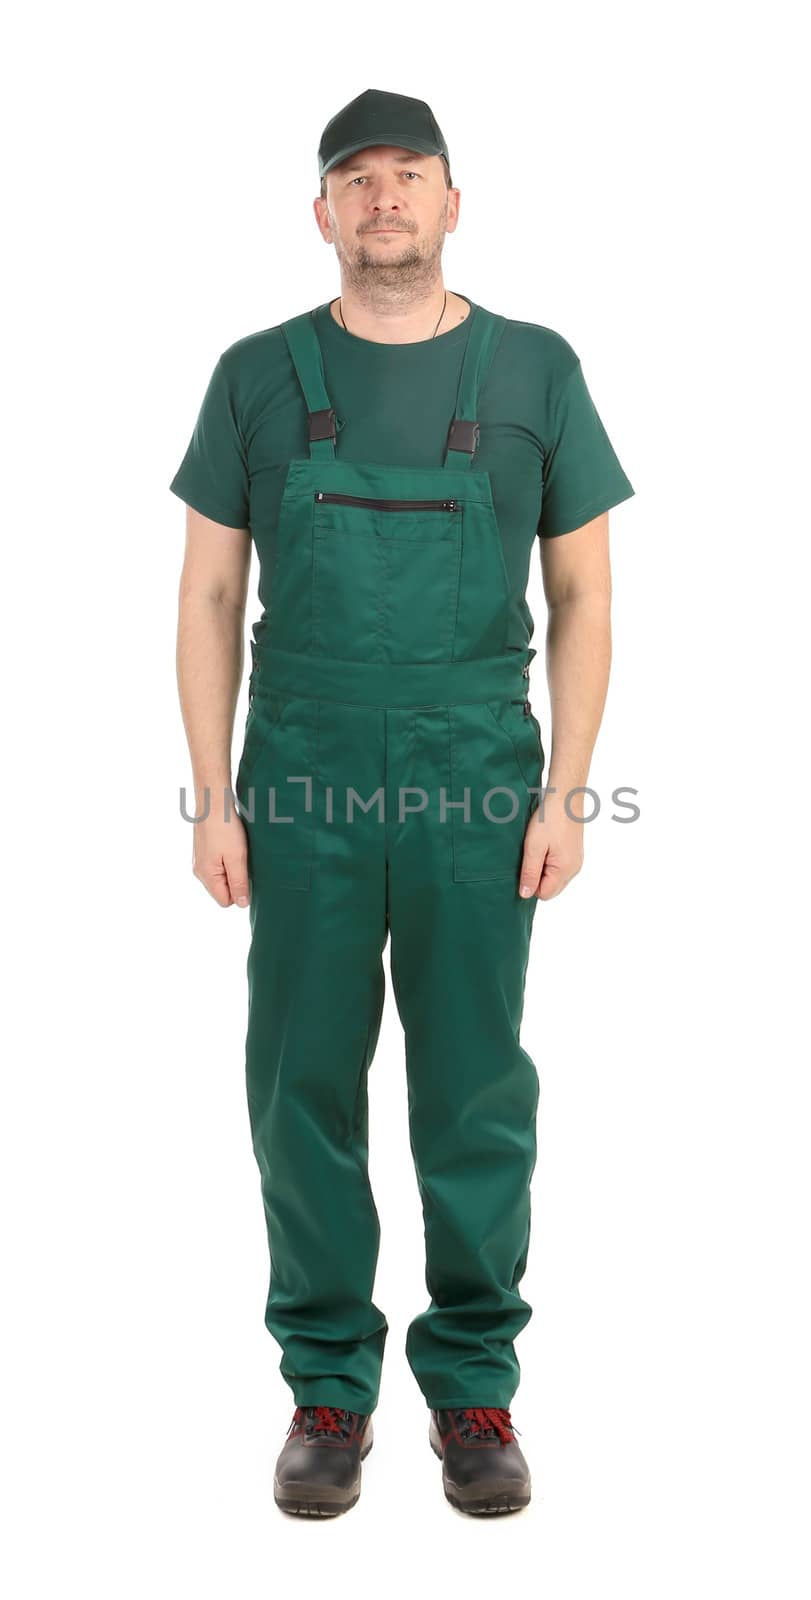 Worker in green overalls. Front by indigolotos